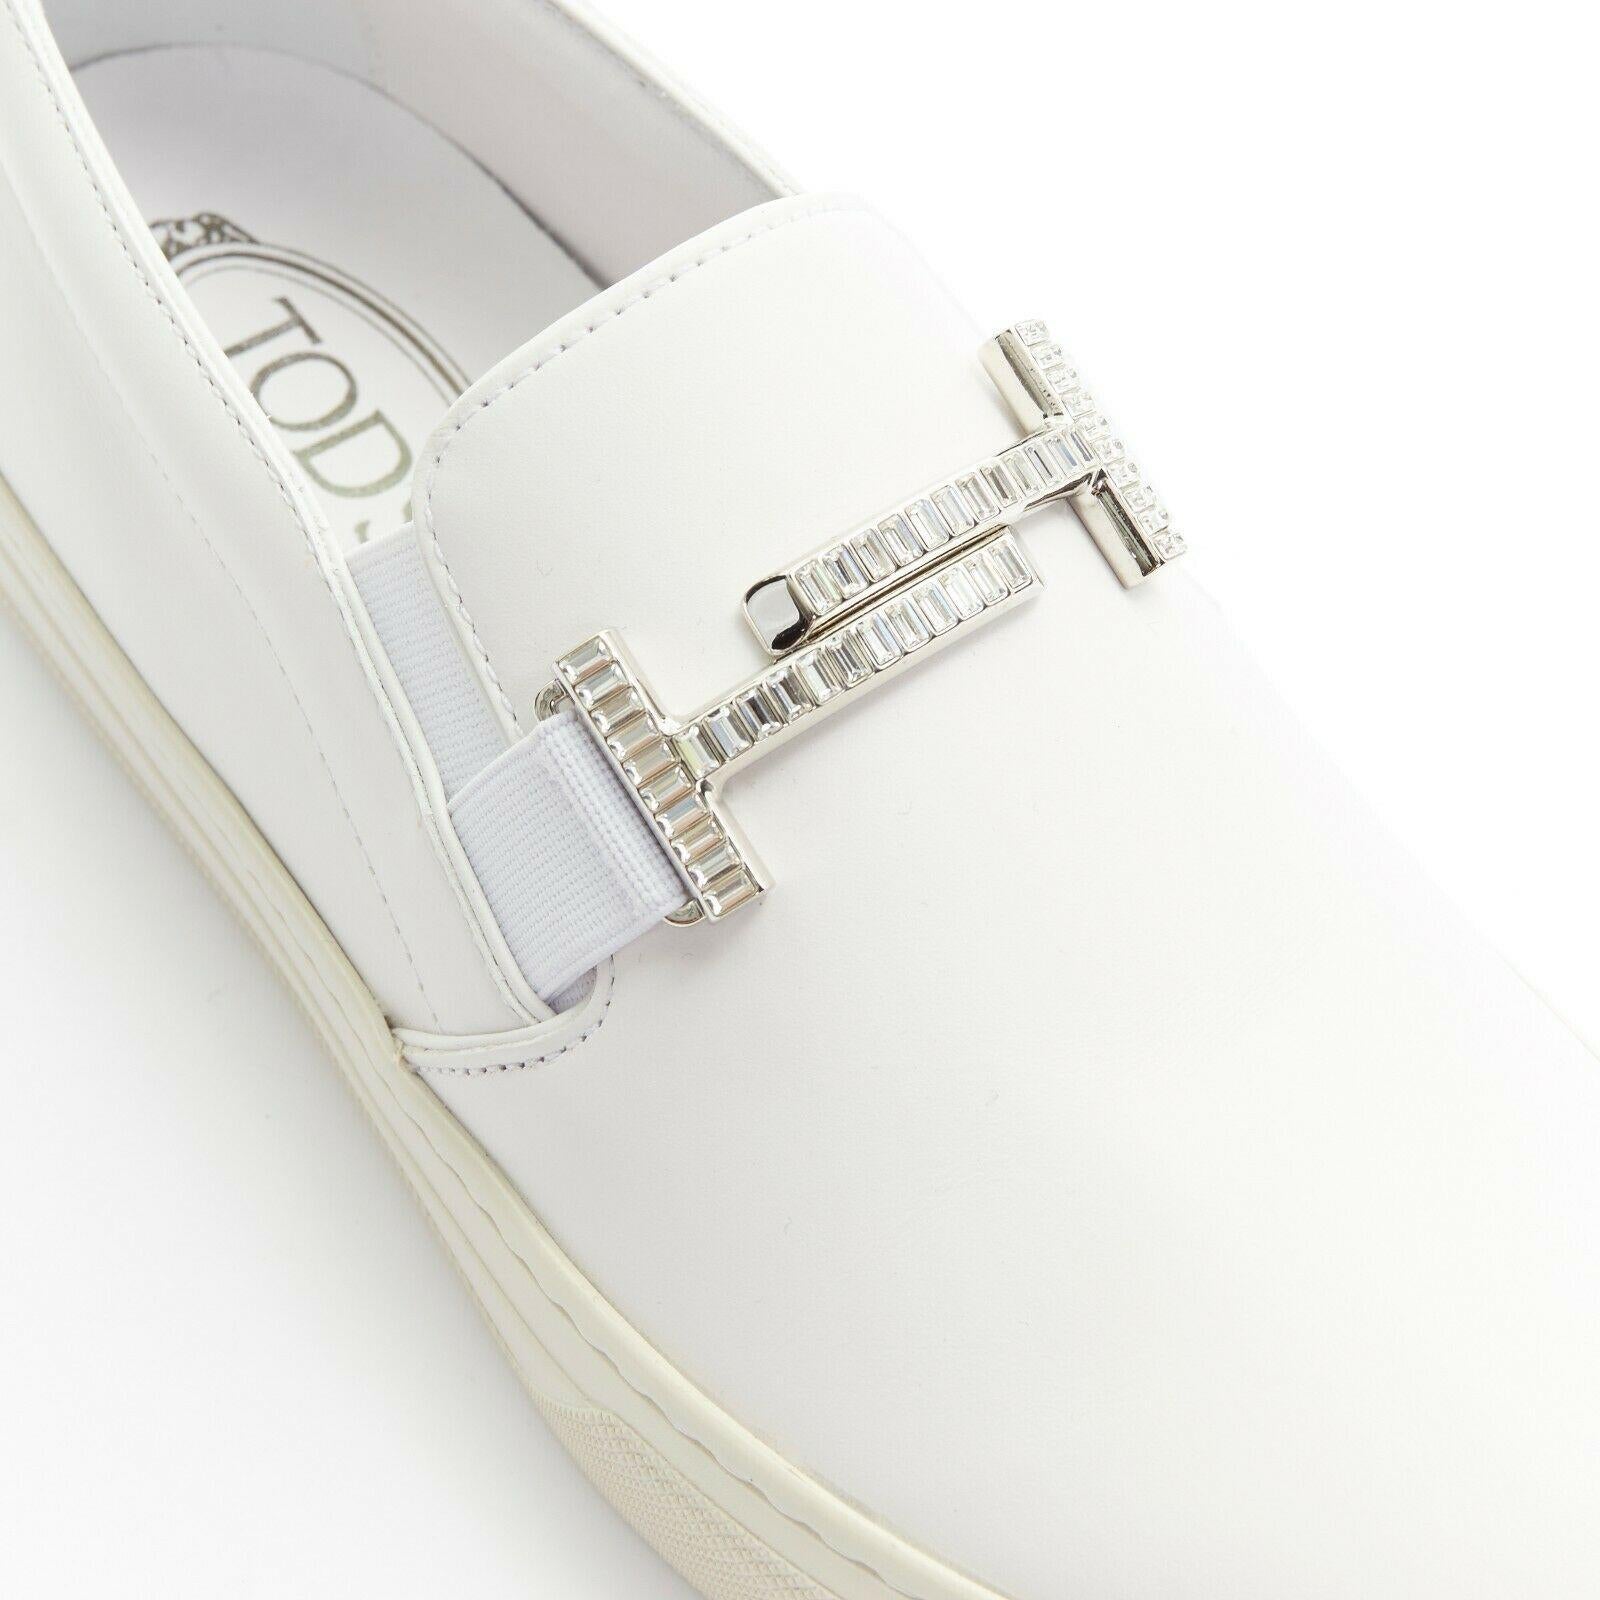 new TOD'S white leather crystal paved buckle round toe sneaker skate shoe EU37.5
TOD'S
White leather upper. 
Silver-tone metal buckle. 
Clear rectangular crystal pave. 
Elasticated stretch inset. 
Tonal stitching. Round toe. 
White outsole. 
Tod's